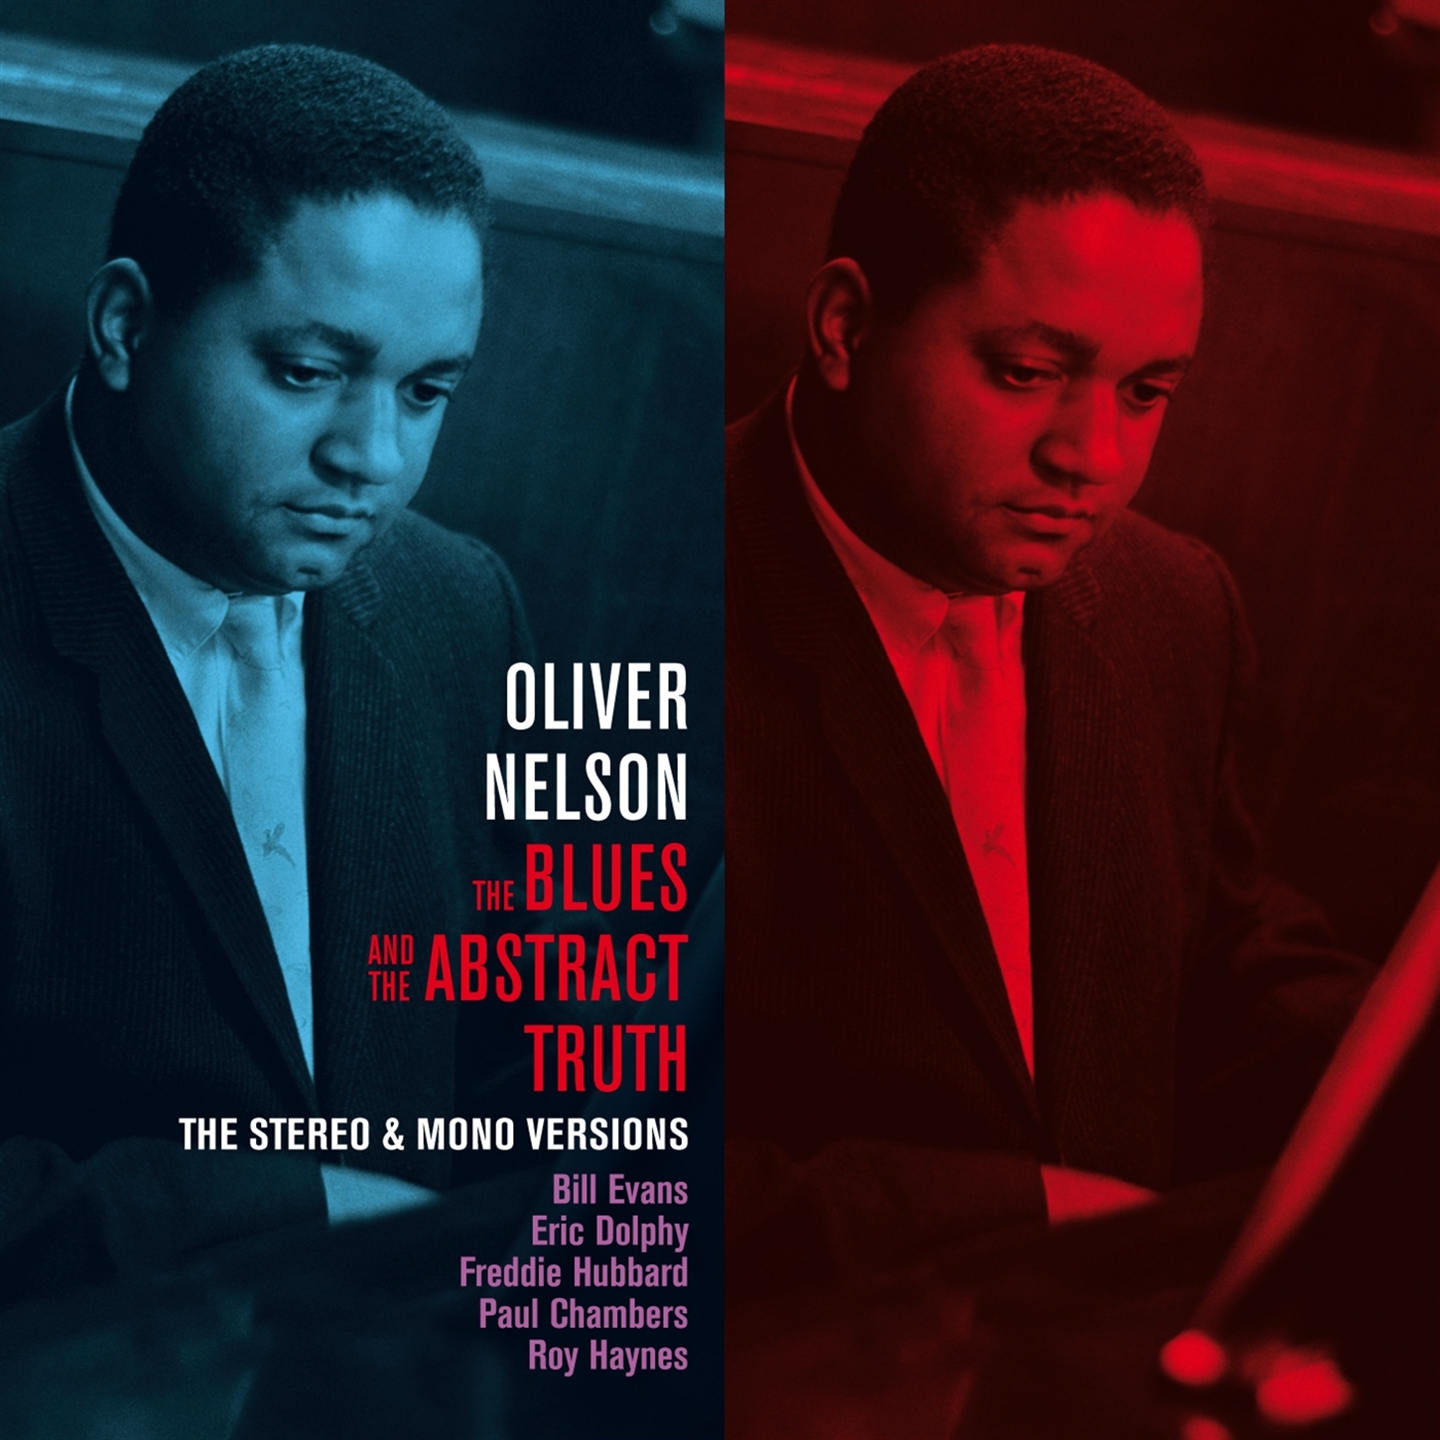 THE BLUES AND THE ABSTRACT TRUTH - THE STEREO & MONO VERSIONS